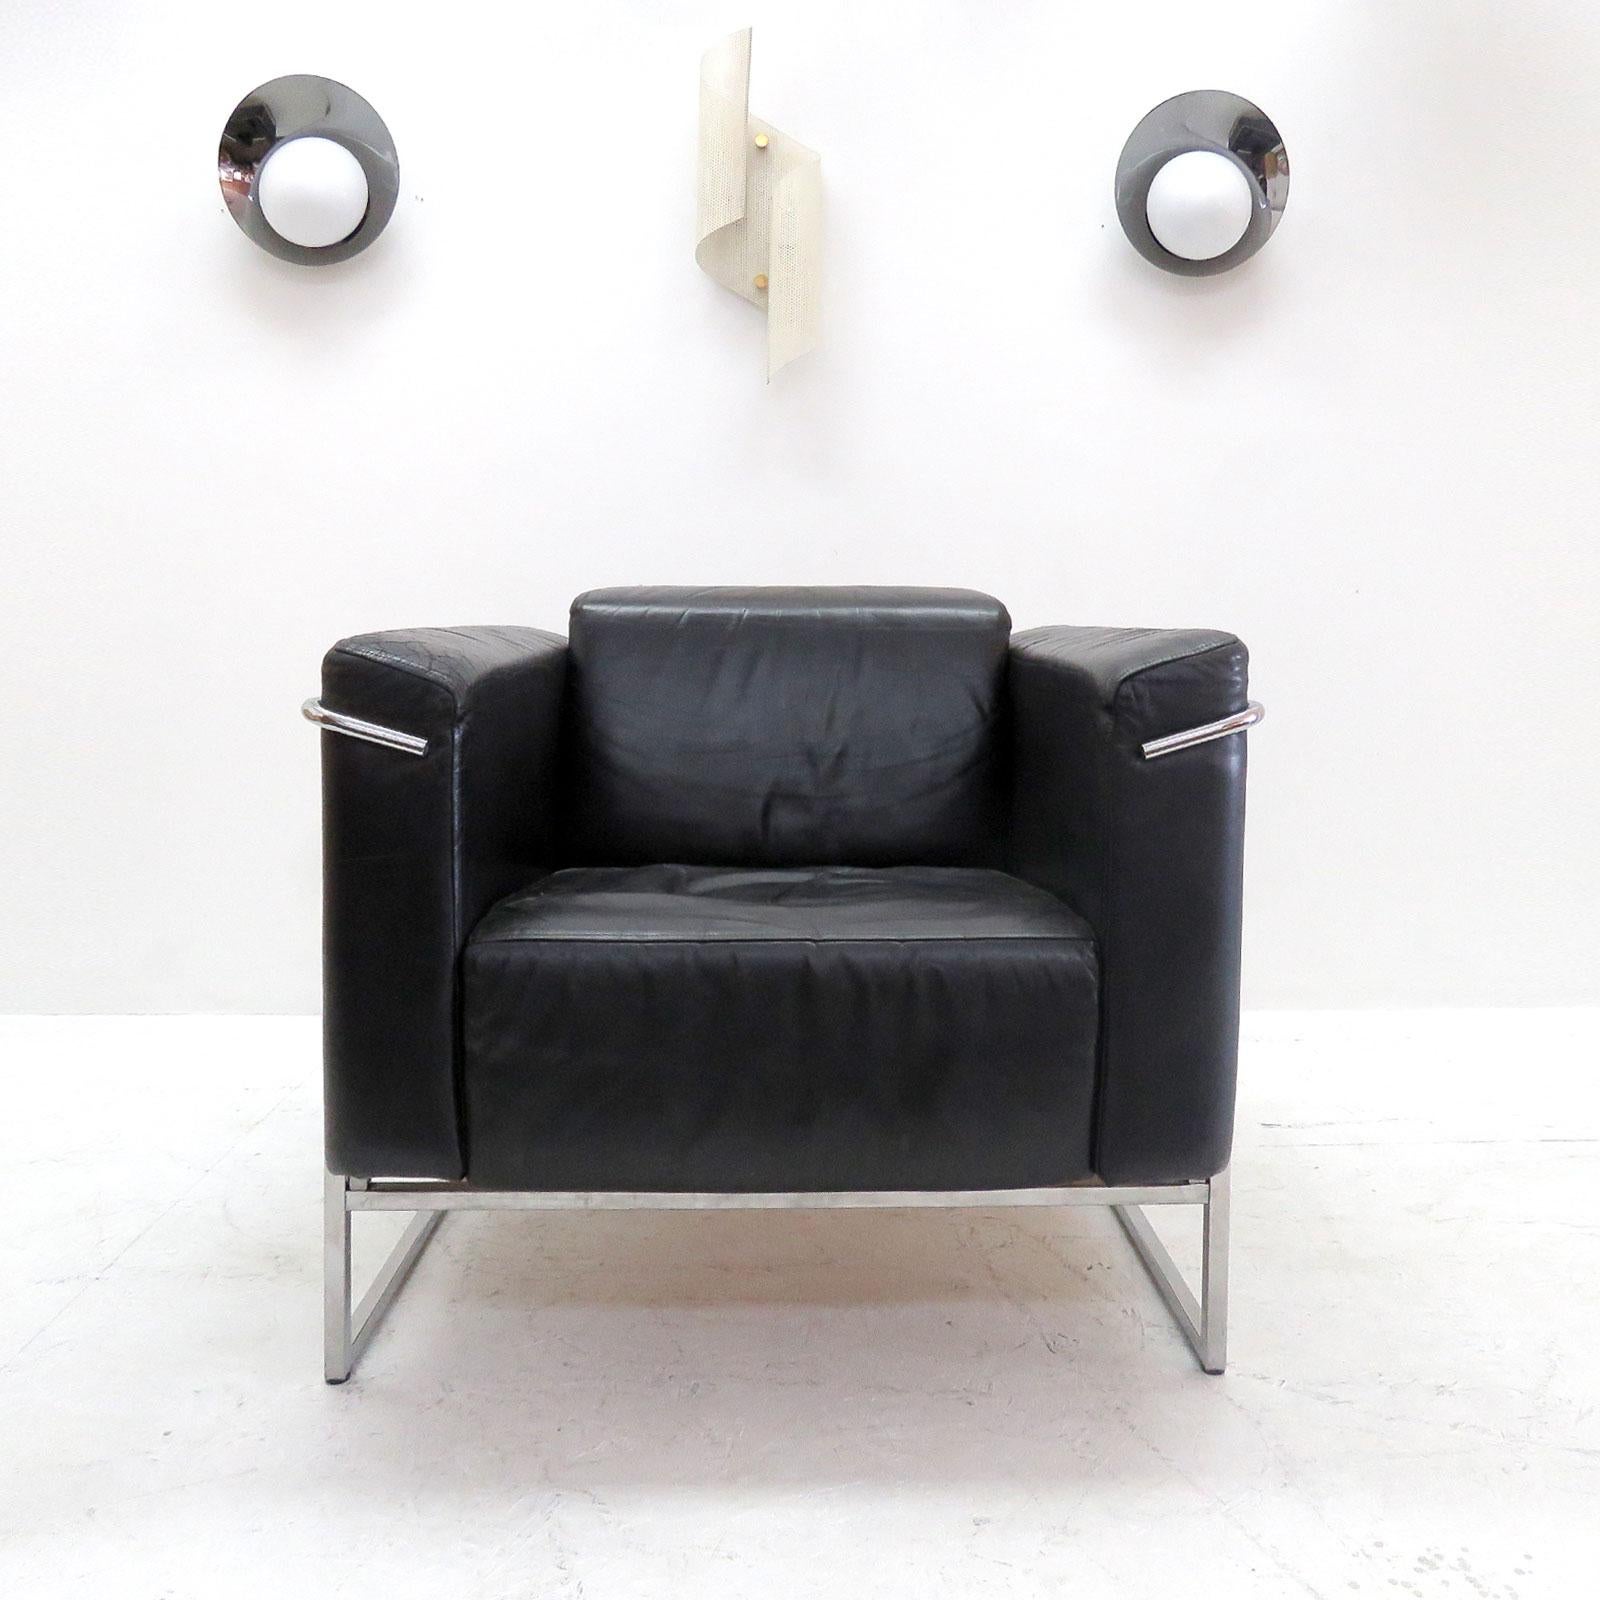 Stunning pair of 'Classio, model 8283' chrome and black leather chairs by Asko, Finland, designed in 1982, cubic design similar to Le Corbusier's LC2 lounge chairs, marked.